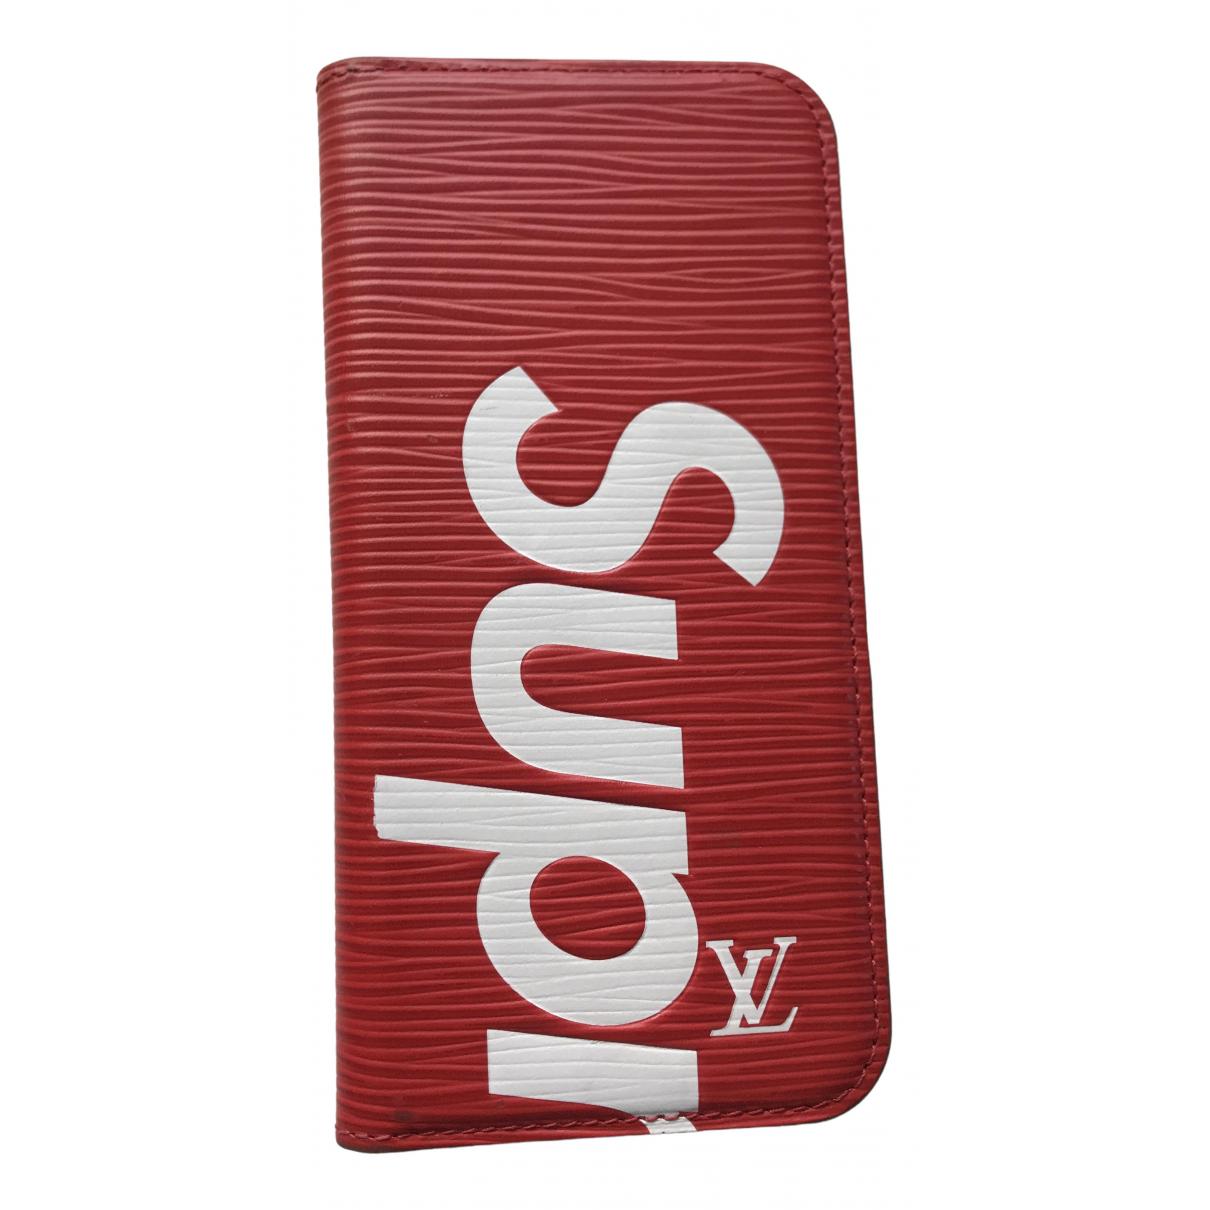 LV Supreme Leather Case for iPhone - Black and Red A Vuitton Day (GET FREE  KN95 MASK ON YOUR PURCHASE)